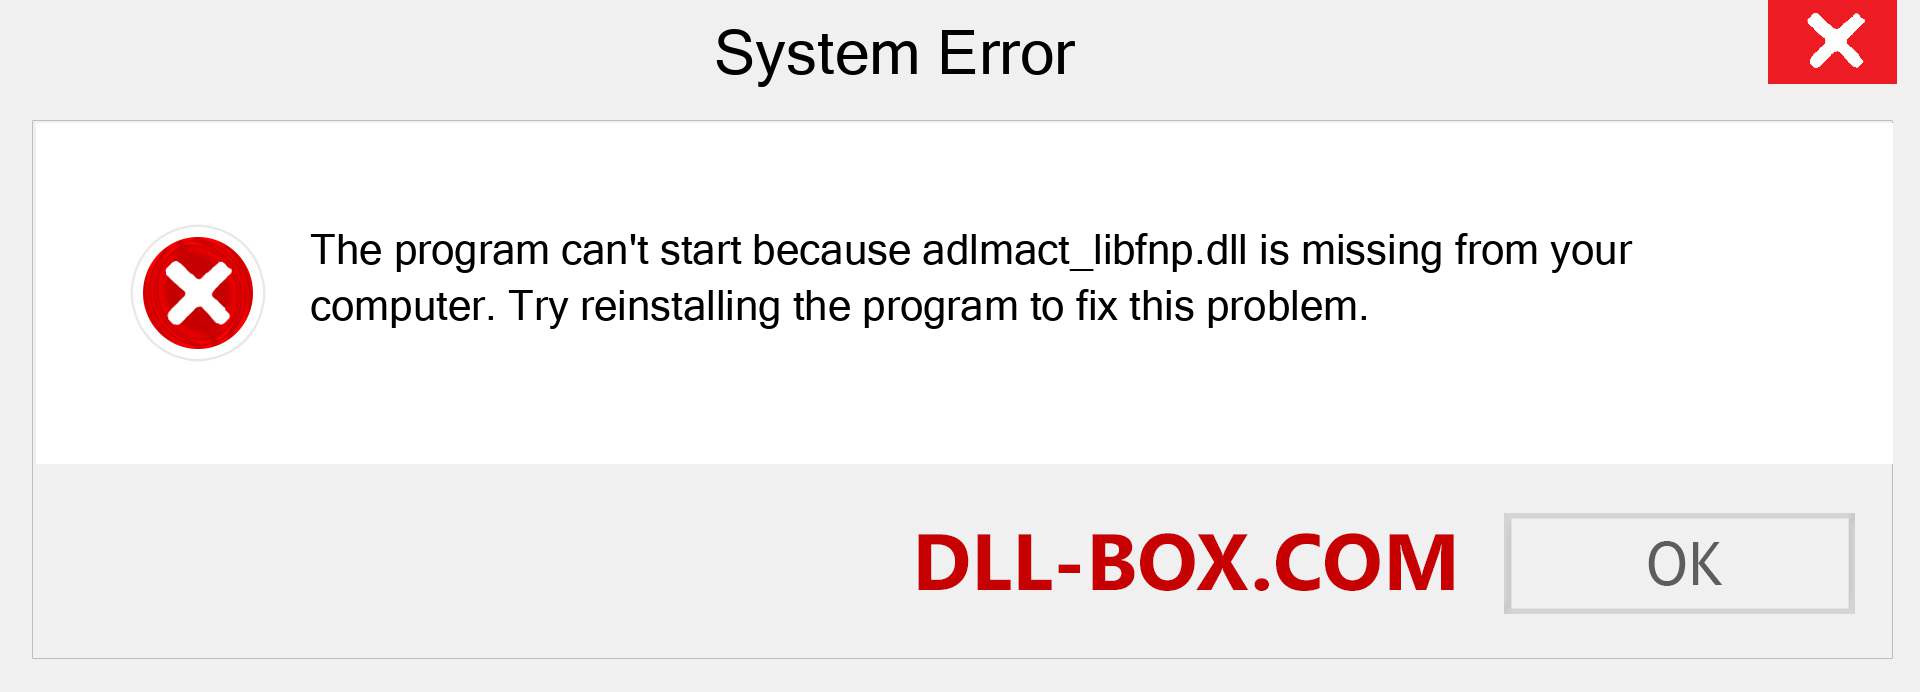  adlmact_libfnp.dll file is missing?. Download for Windows 7, 8, 10 - Fix  adlmact_libfnp dll Missing Error on Windows, photos, images